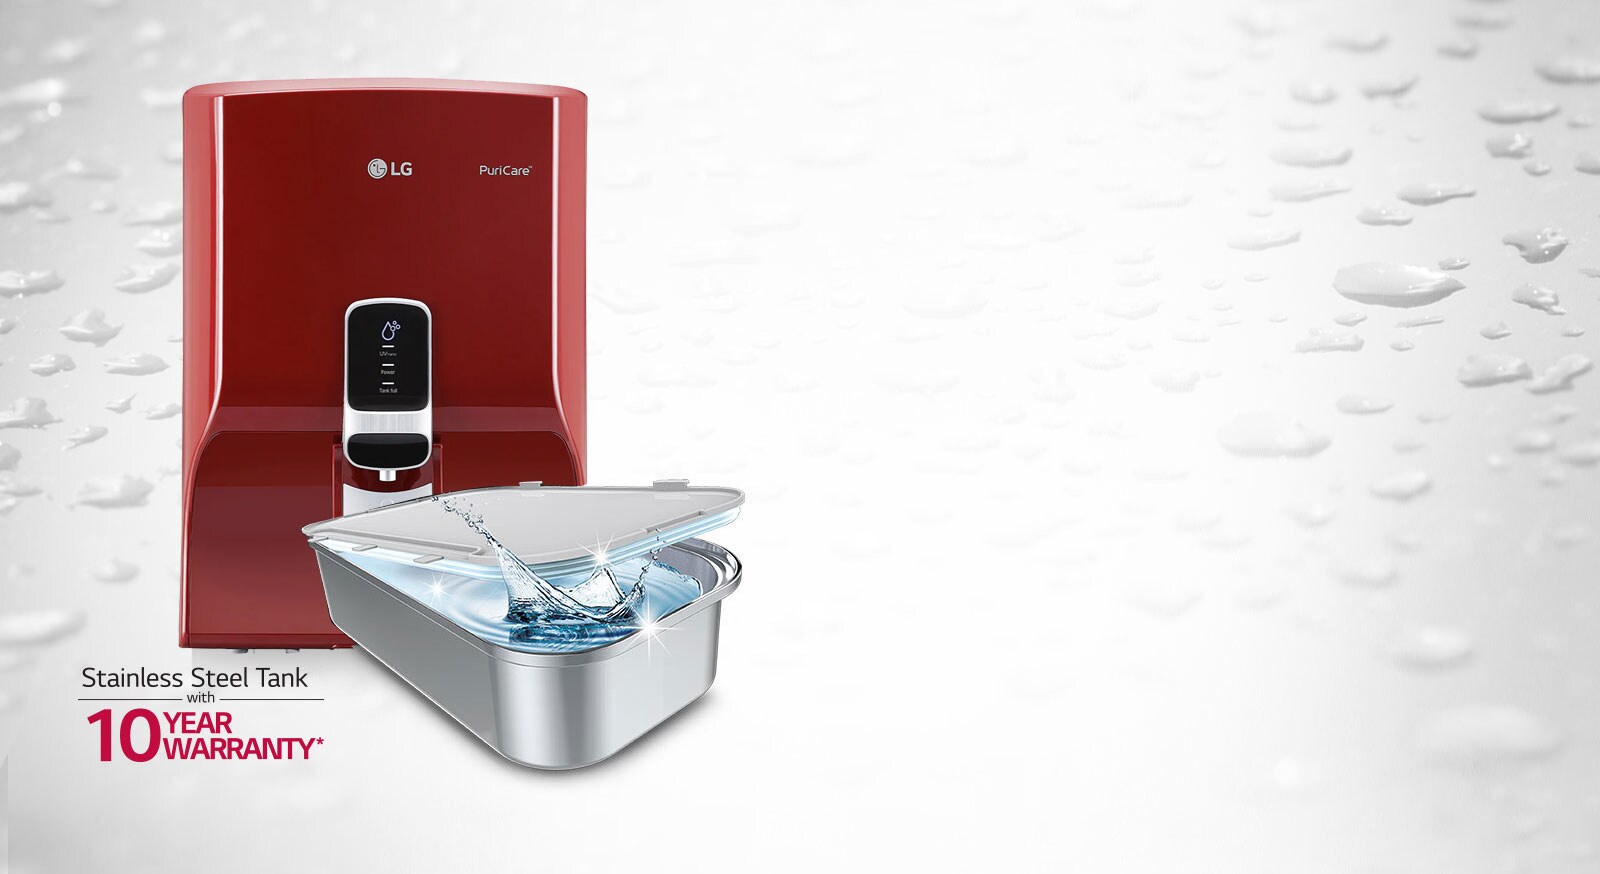 Here is Why LG Water Purifier is the Best Water Purifier